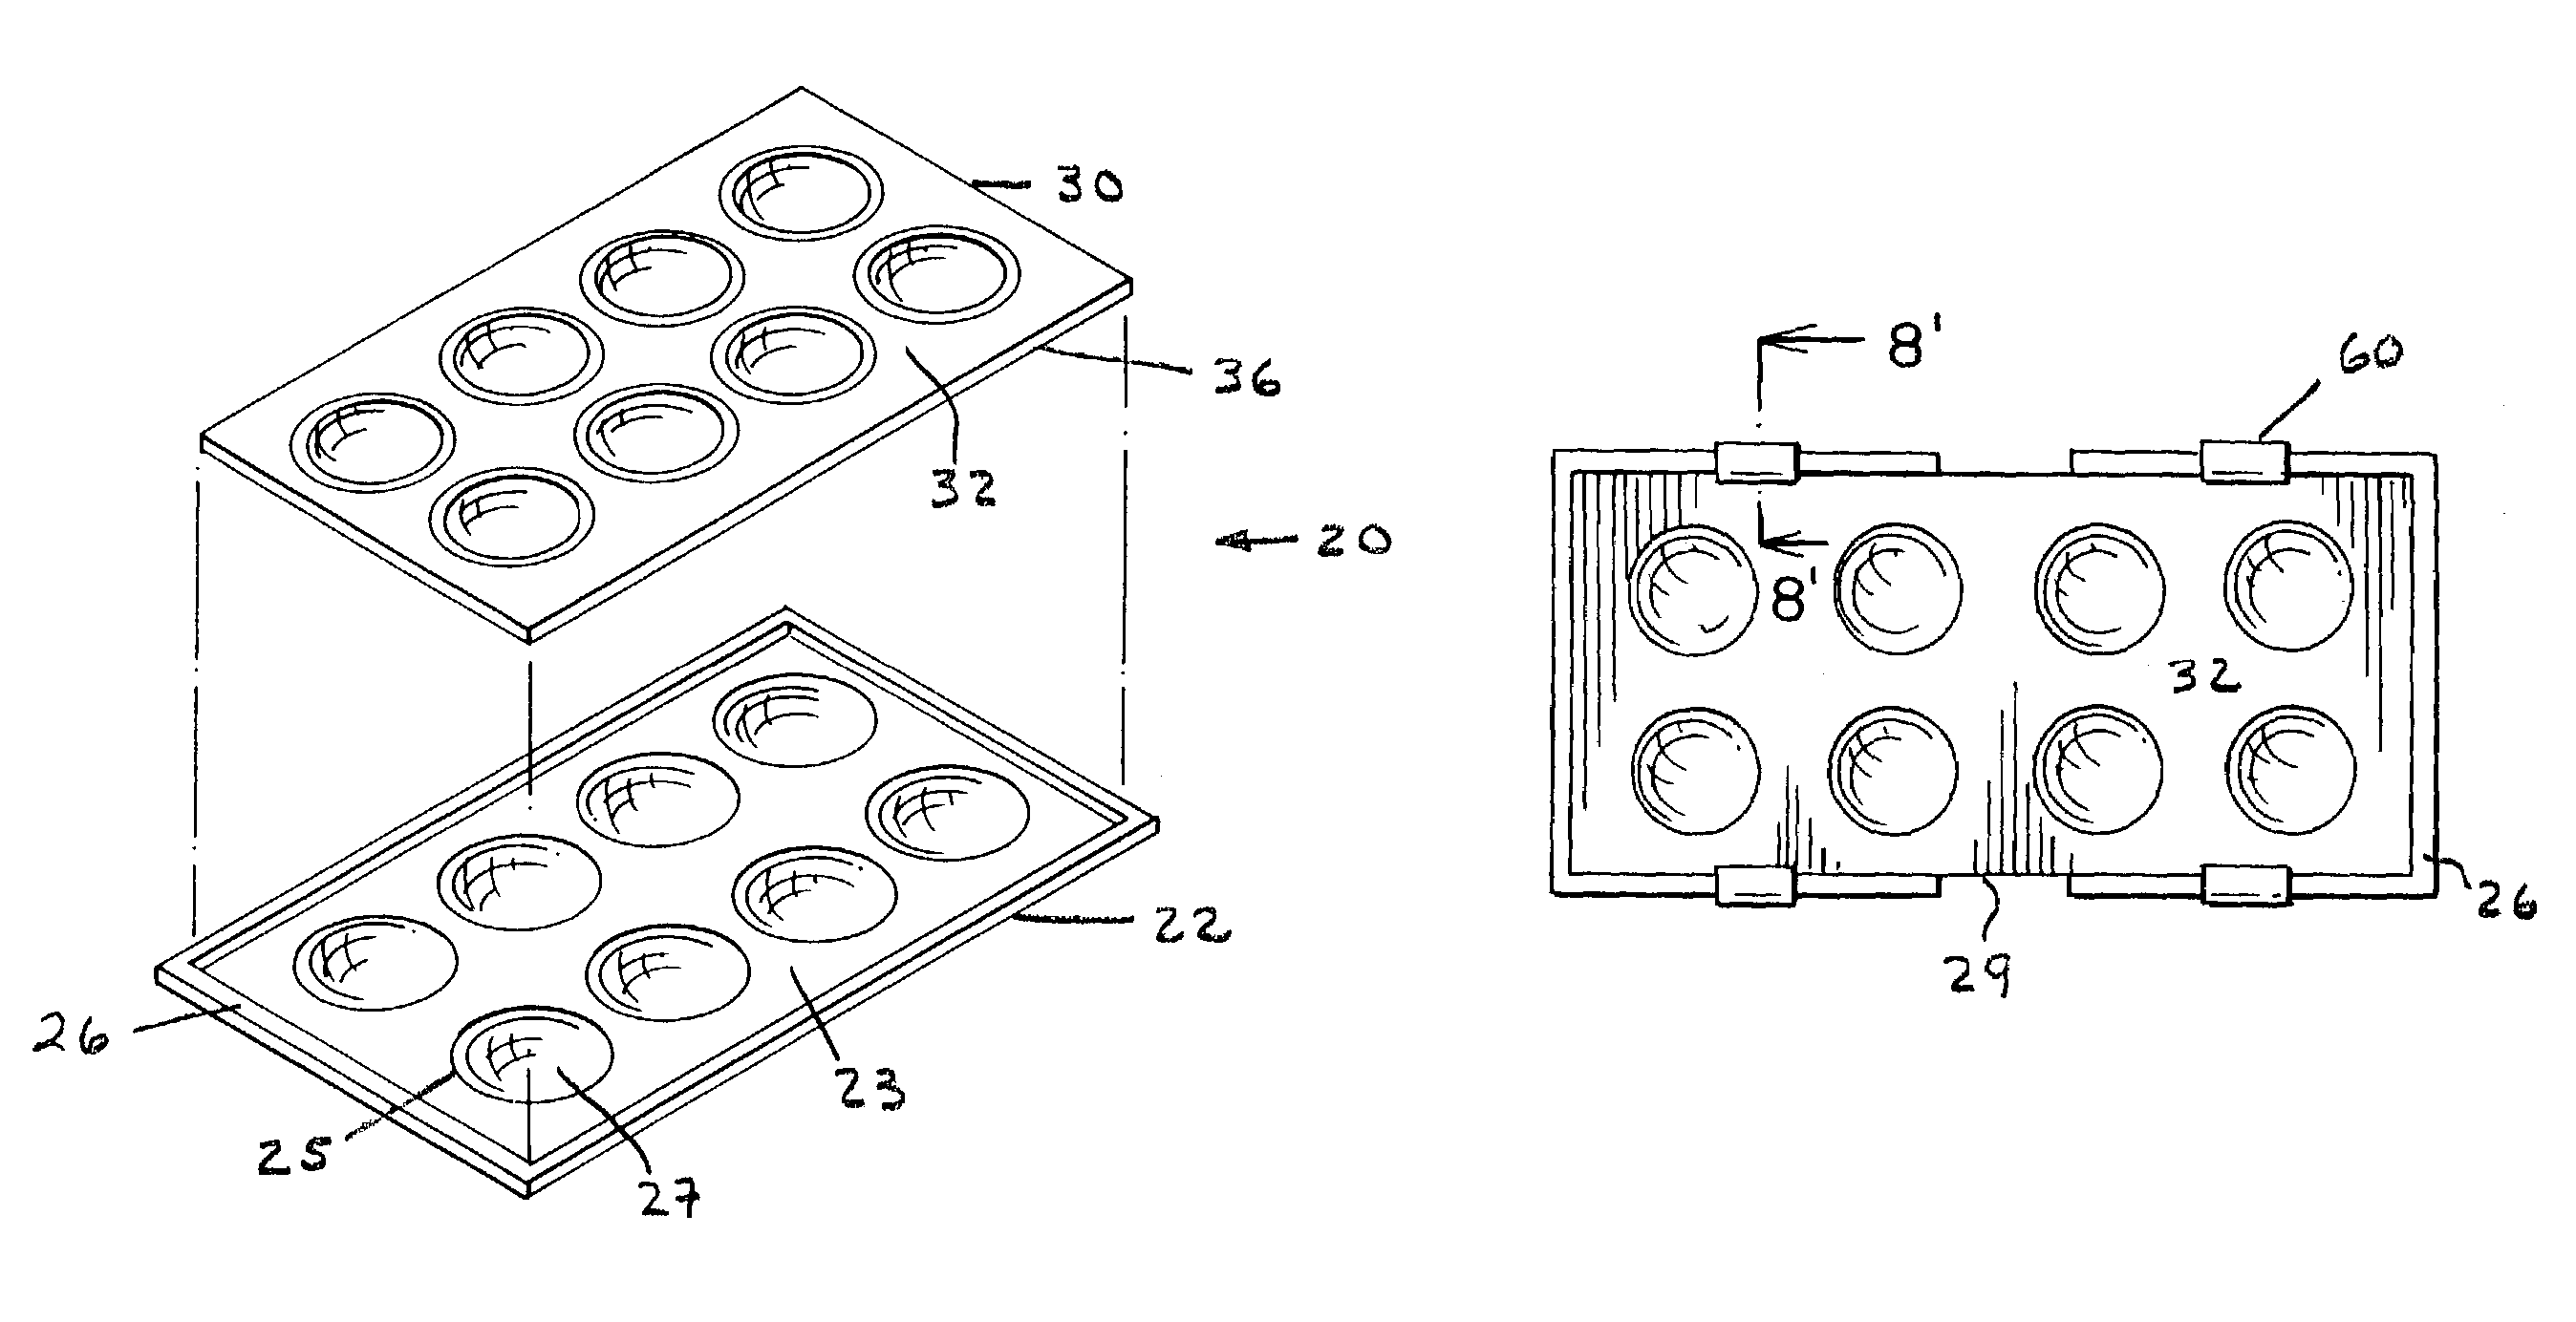 Individual dome molds and baking assembly